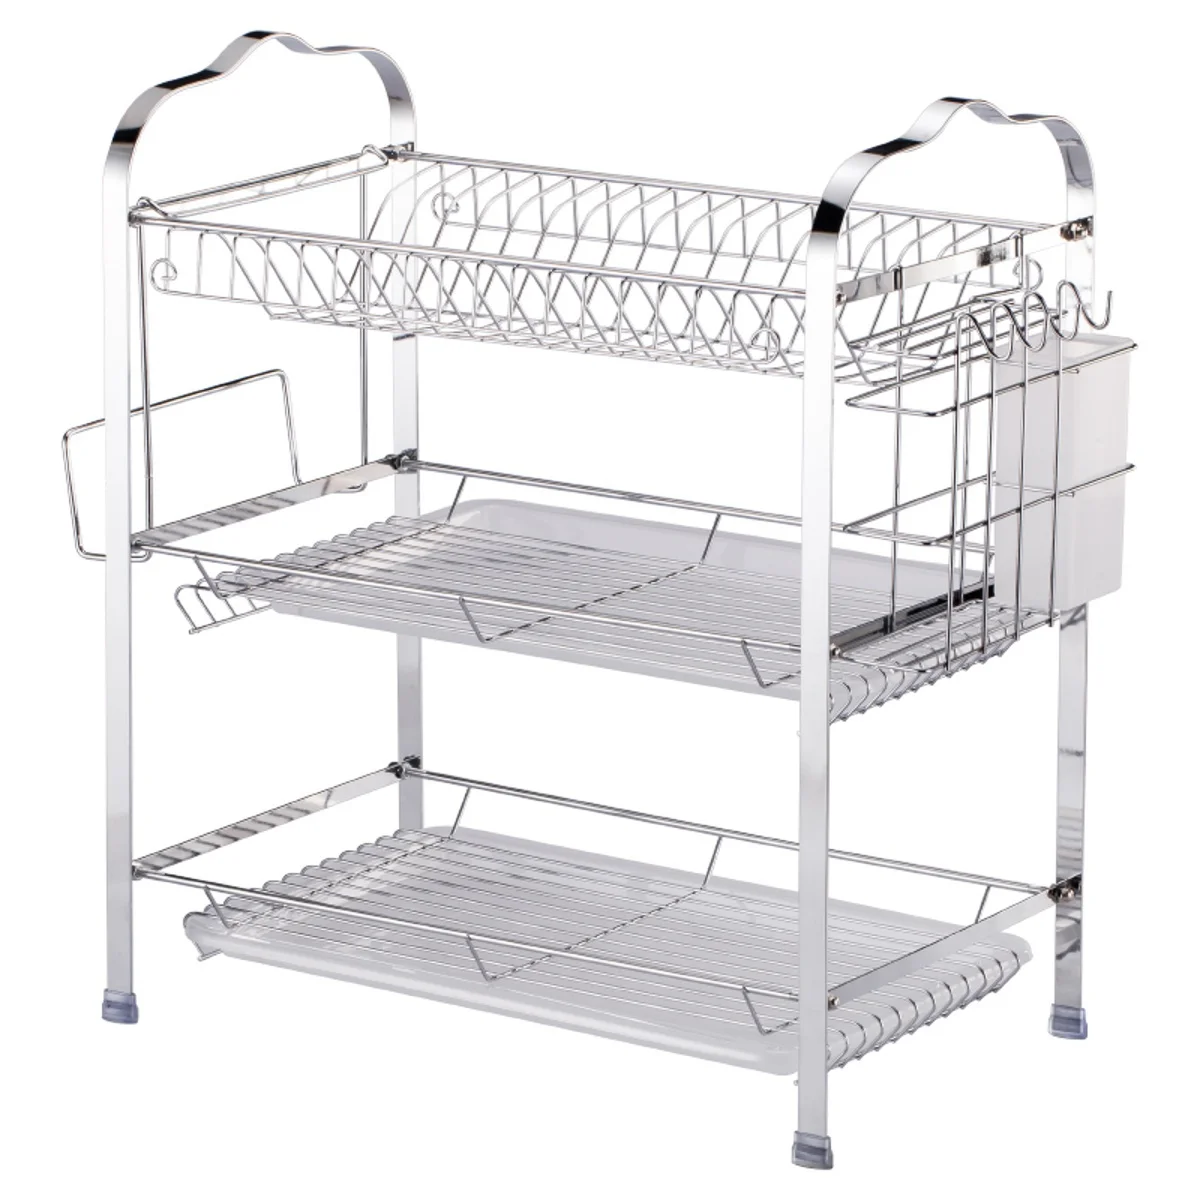 Chrome Dish Drainer Cutlery Cup Rack Drip Tray Plates Holder